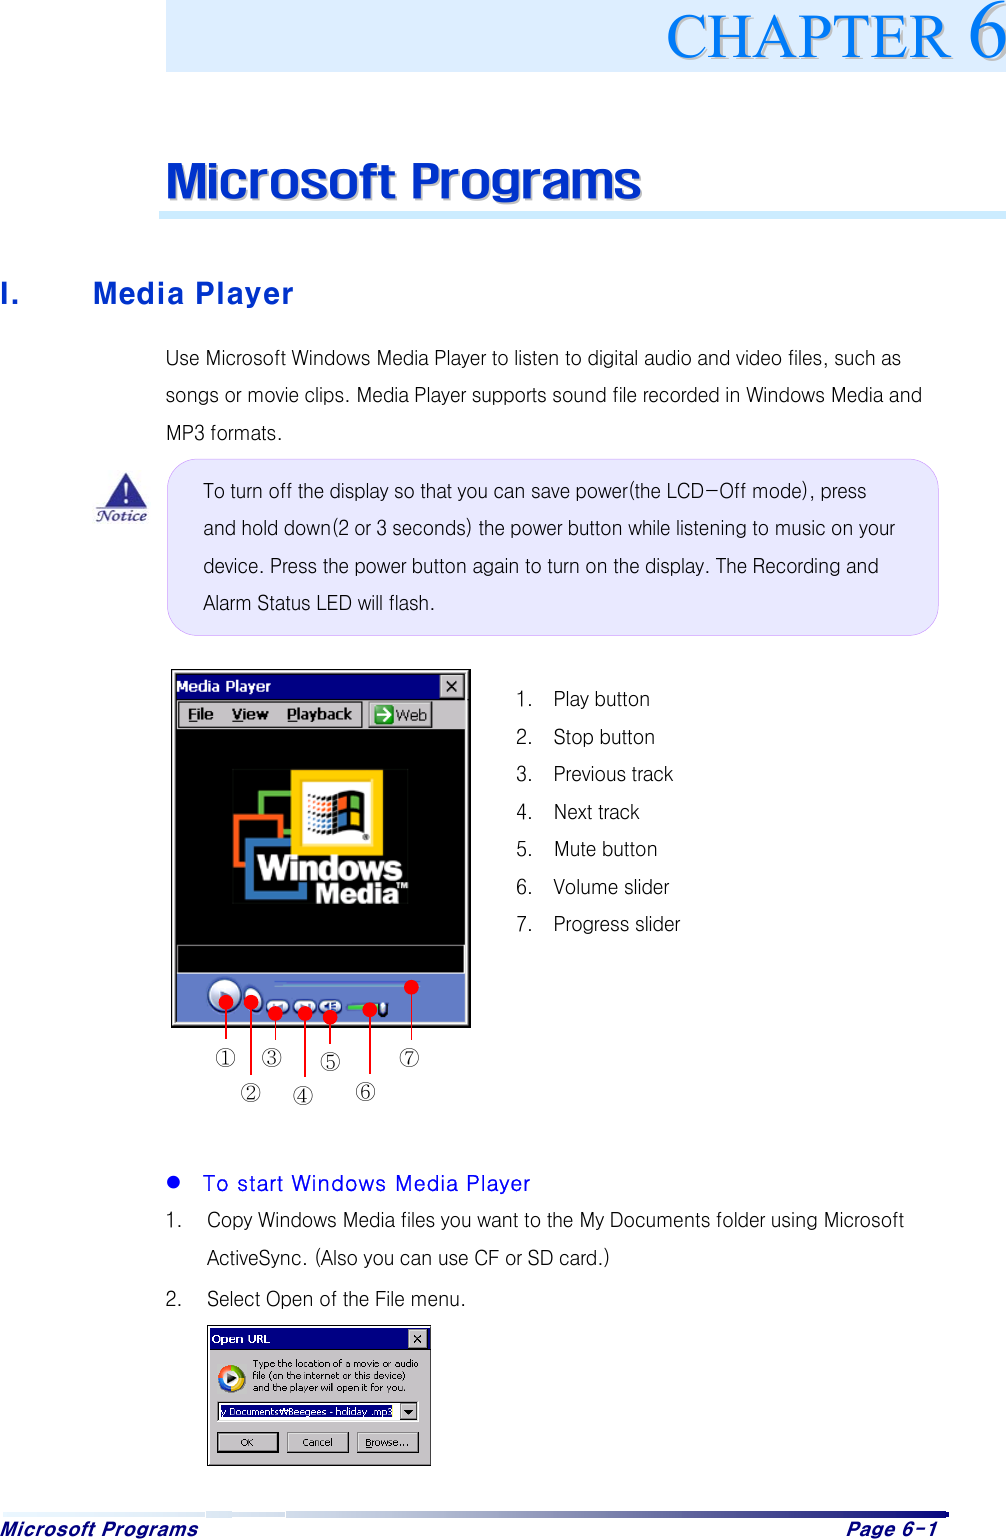 Microsoft Programs    Page 6-1     MMiiccrroossoofftt  PPrrooggrraammss   I.  Media Player Use Microsoft Windows Media Player to listen to digital audio and video files, such as songs or movie clips. Media Player supports sound file recorded in Windows Media and MP3 formats.                      To start Windows Media Player 1.  Copy Windows Media files you want to the My Documents folder using Microsoft ActiveSync. (Also you can use CF or SD card.) 2.  Select Open of the File menu.     CCHHAAPPTTEERR661.  Play button 2.  Stop button 3.  Previous track 4.  Next track 5.  Mute button 6.  Volume slider 7.  Progress slider ② ③ ④ ⑤ ⑥⑦① To turn off the display so that you can save power(the LCD-Off mode), press and hold down(2 or 3 seconds) the power button while listening to music on your device. Press the power button again to turn on the display. The Recording and Alarm Status LED will flash. 